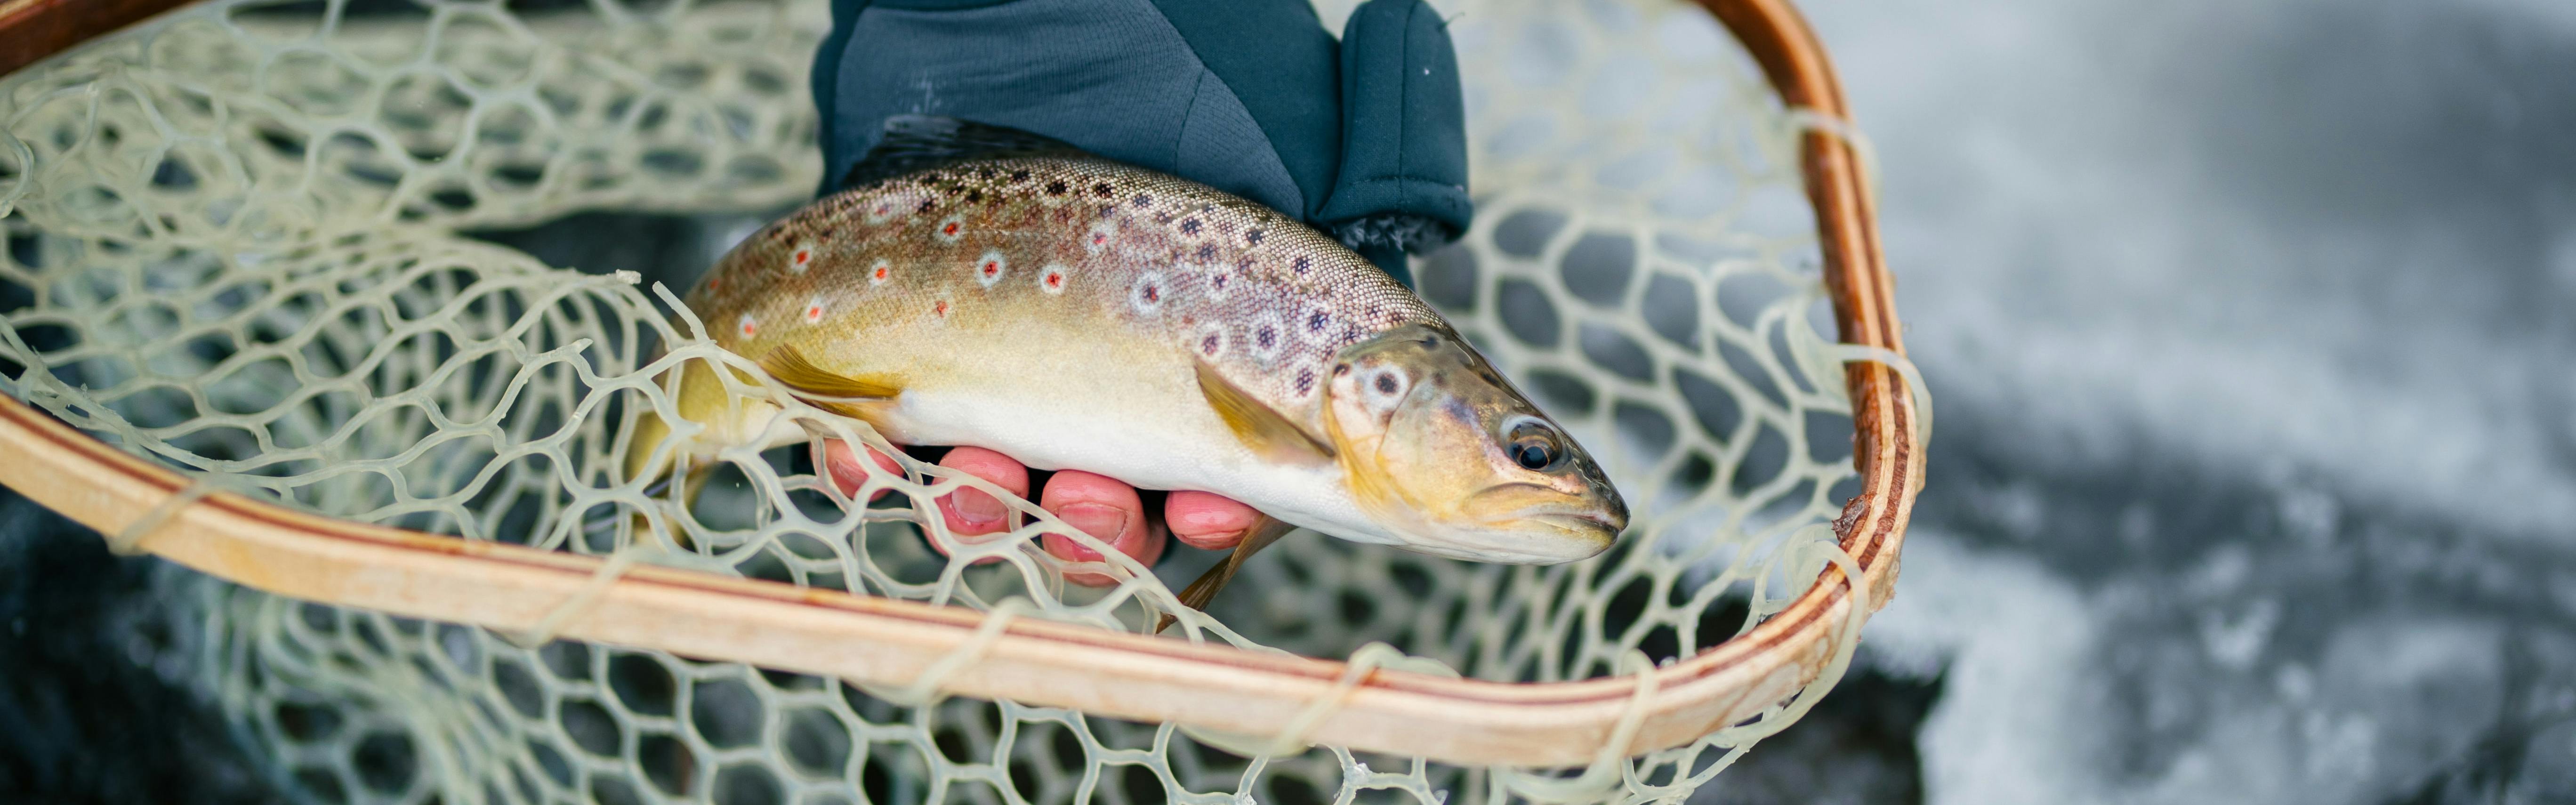 South Park's Pike and Trout - Colorado Outdoors Online